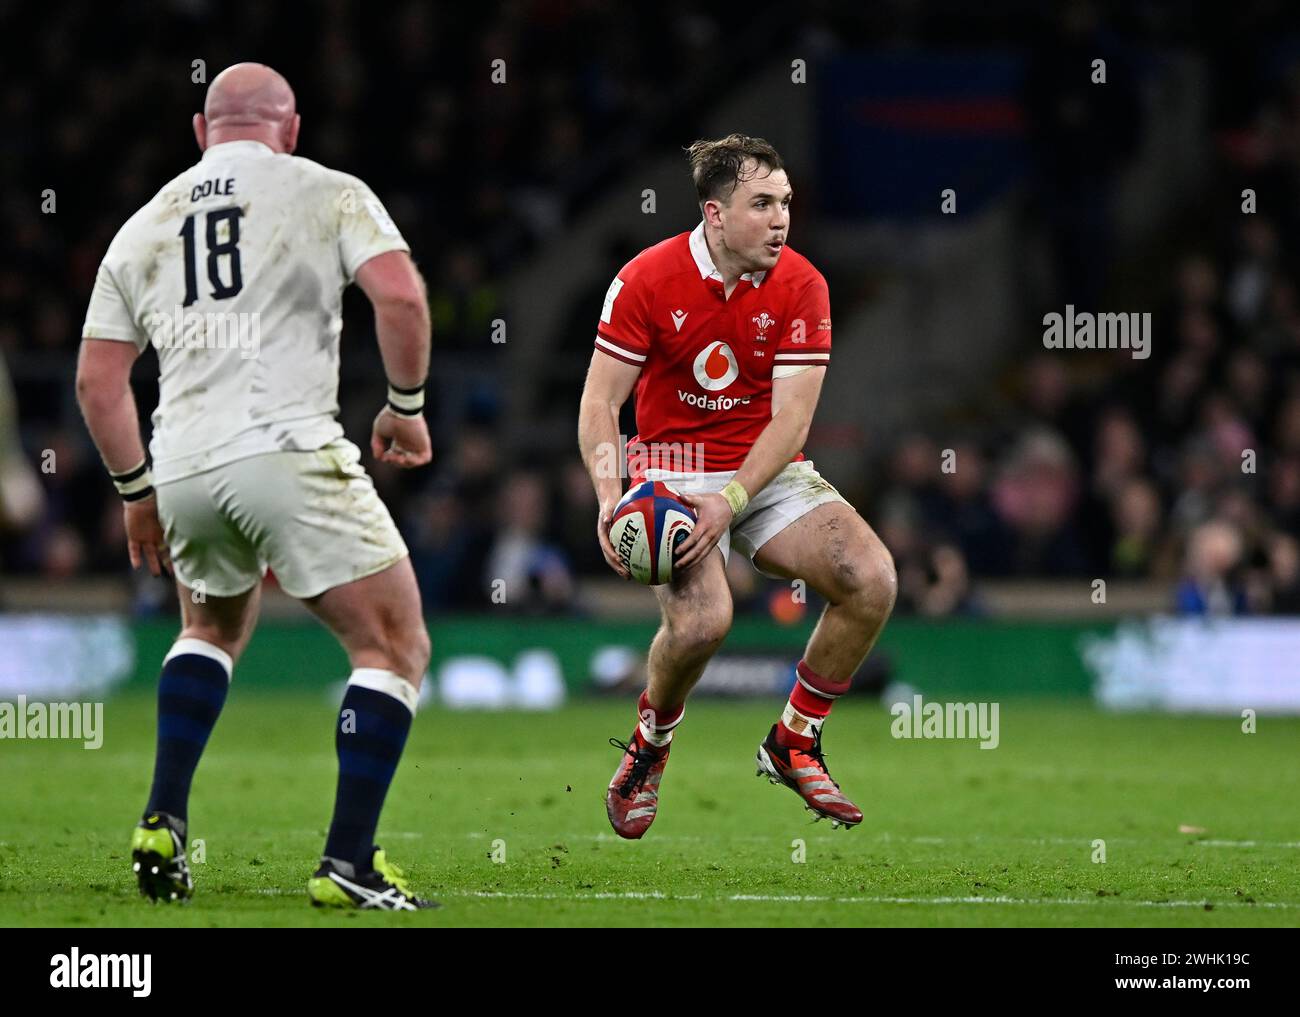 Twickenham, United Kingdom. 10th Feb, 2024. England V Wales, Guinness 6 Nations. Twickenham Stadium. Twickenham. Ioan Lloyd (Wales) tries to go past Dan Cole (England) during the England V Wales rugby match in the Guinness 6 Nations. Credit: Sport In Pictures/Alamy Live News Stock Photo